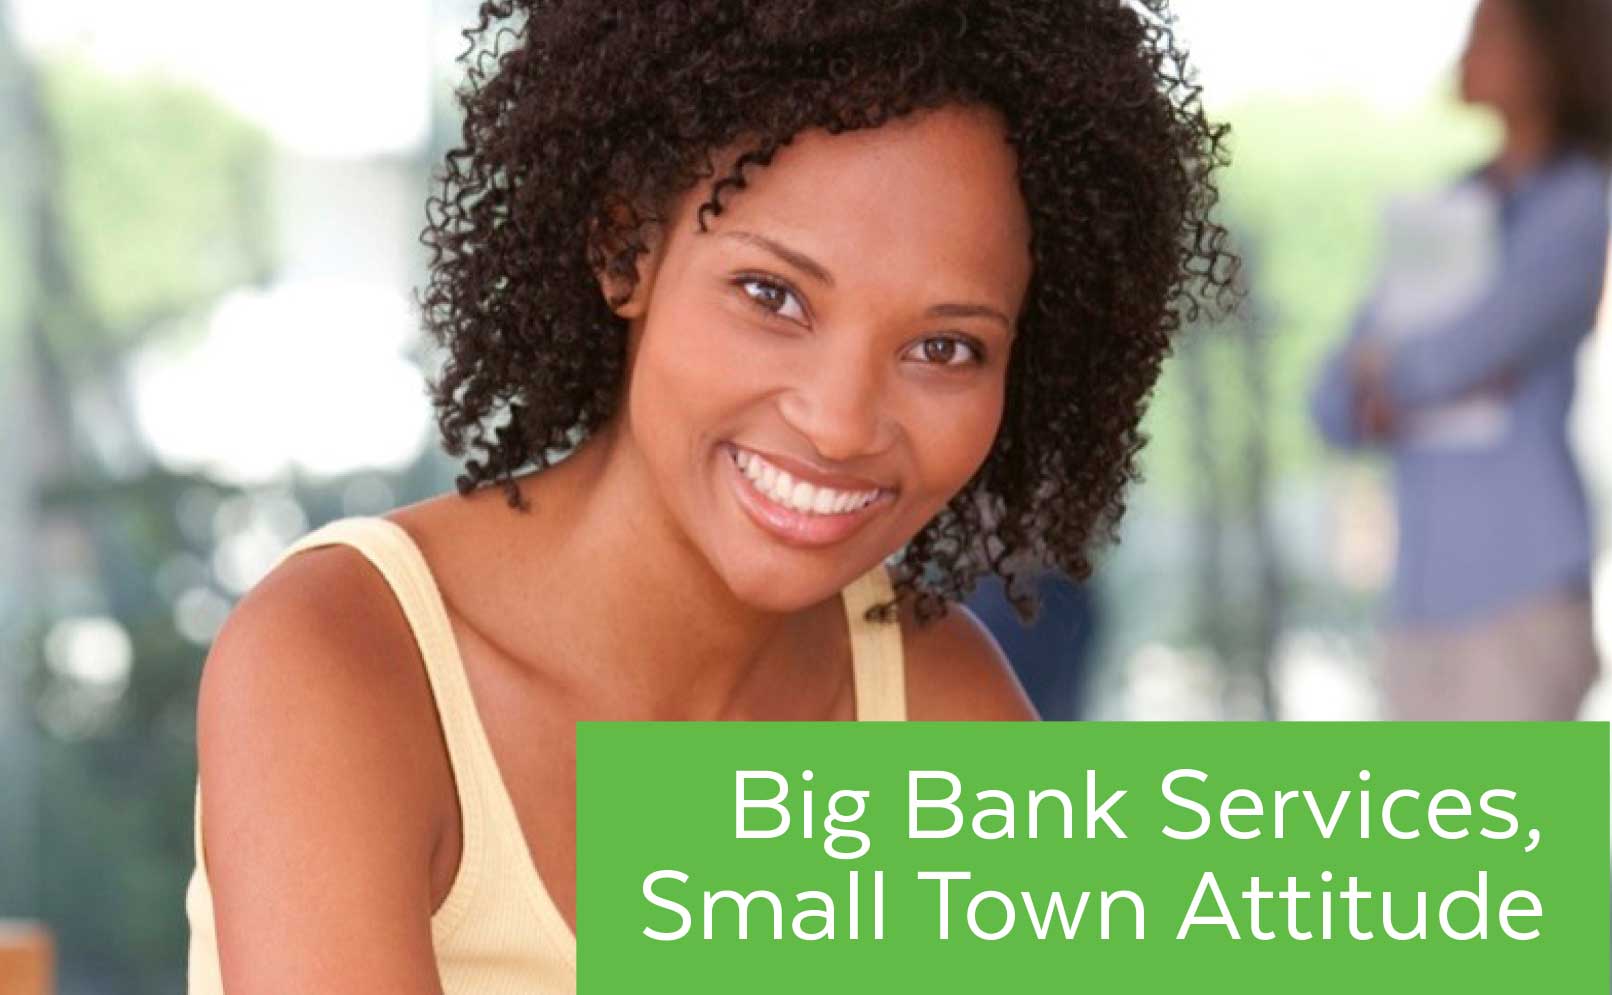 Smiling person with "Big Bank Services, Small Town Attitude" hover text